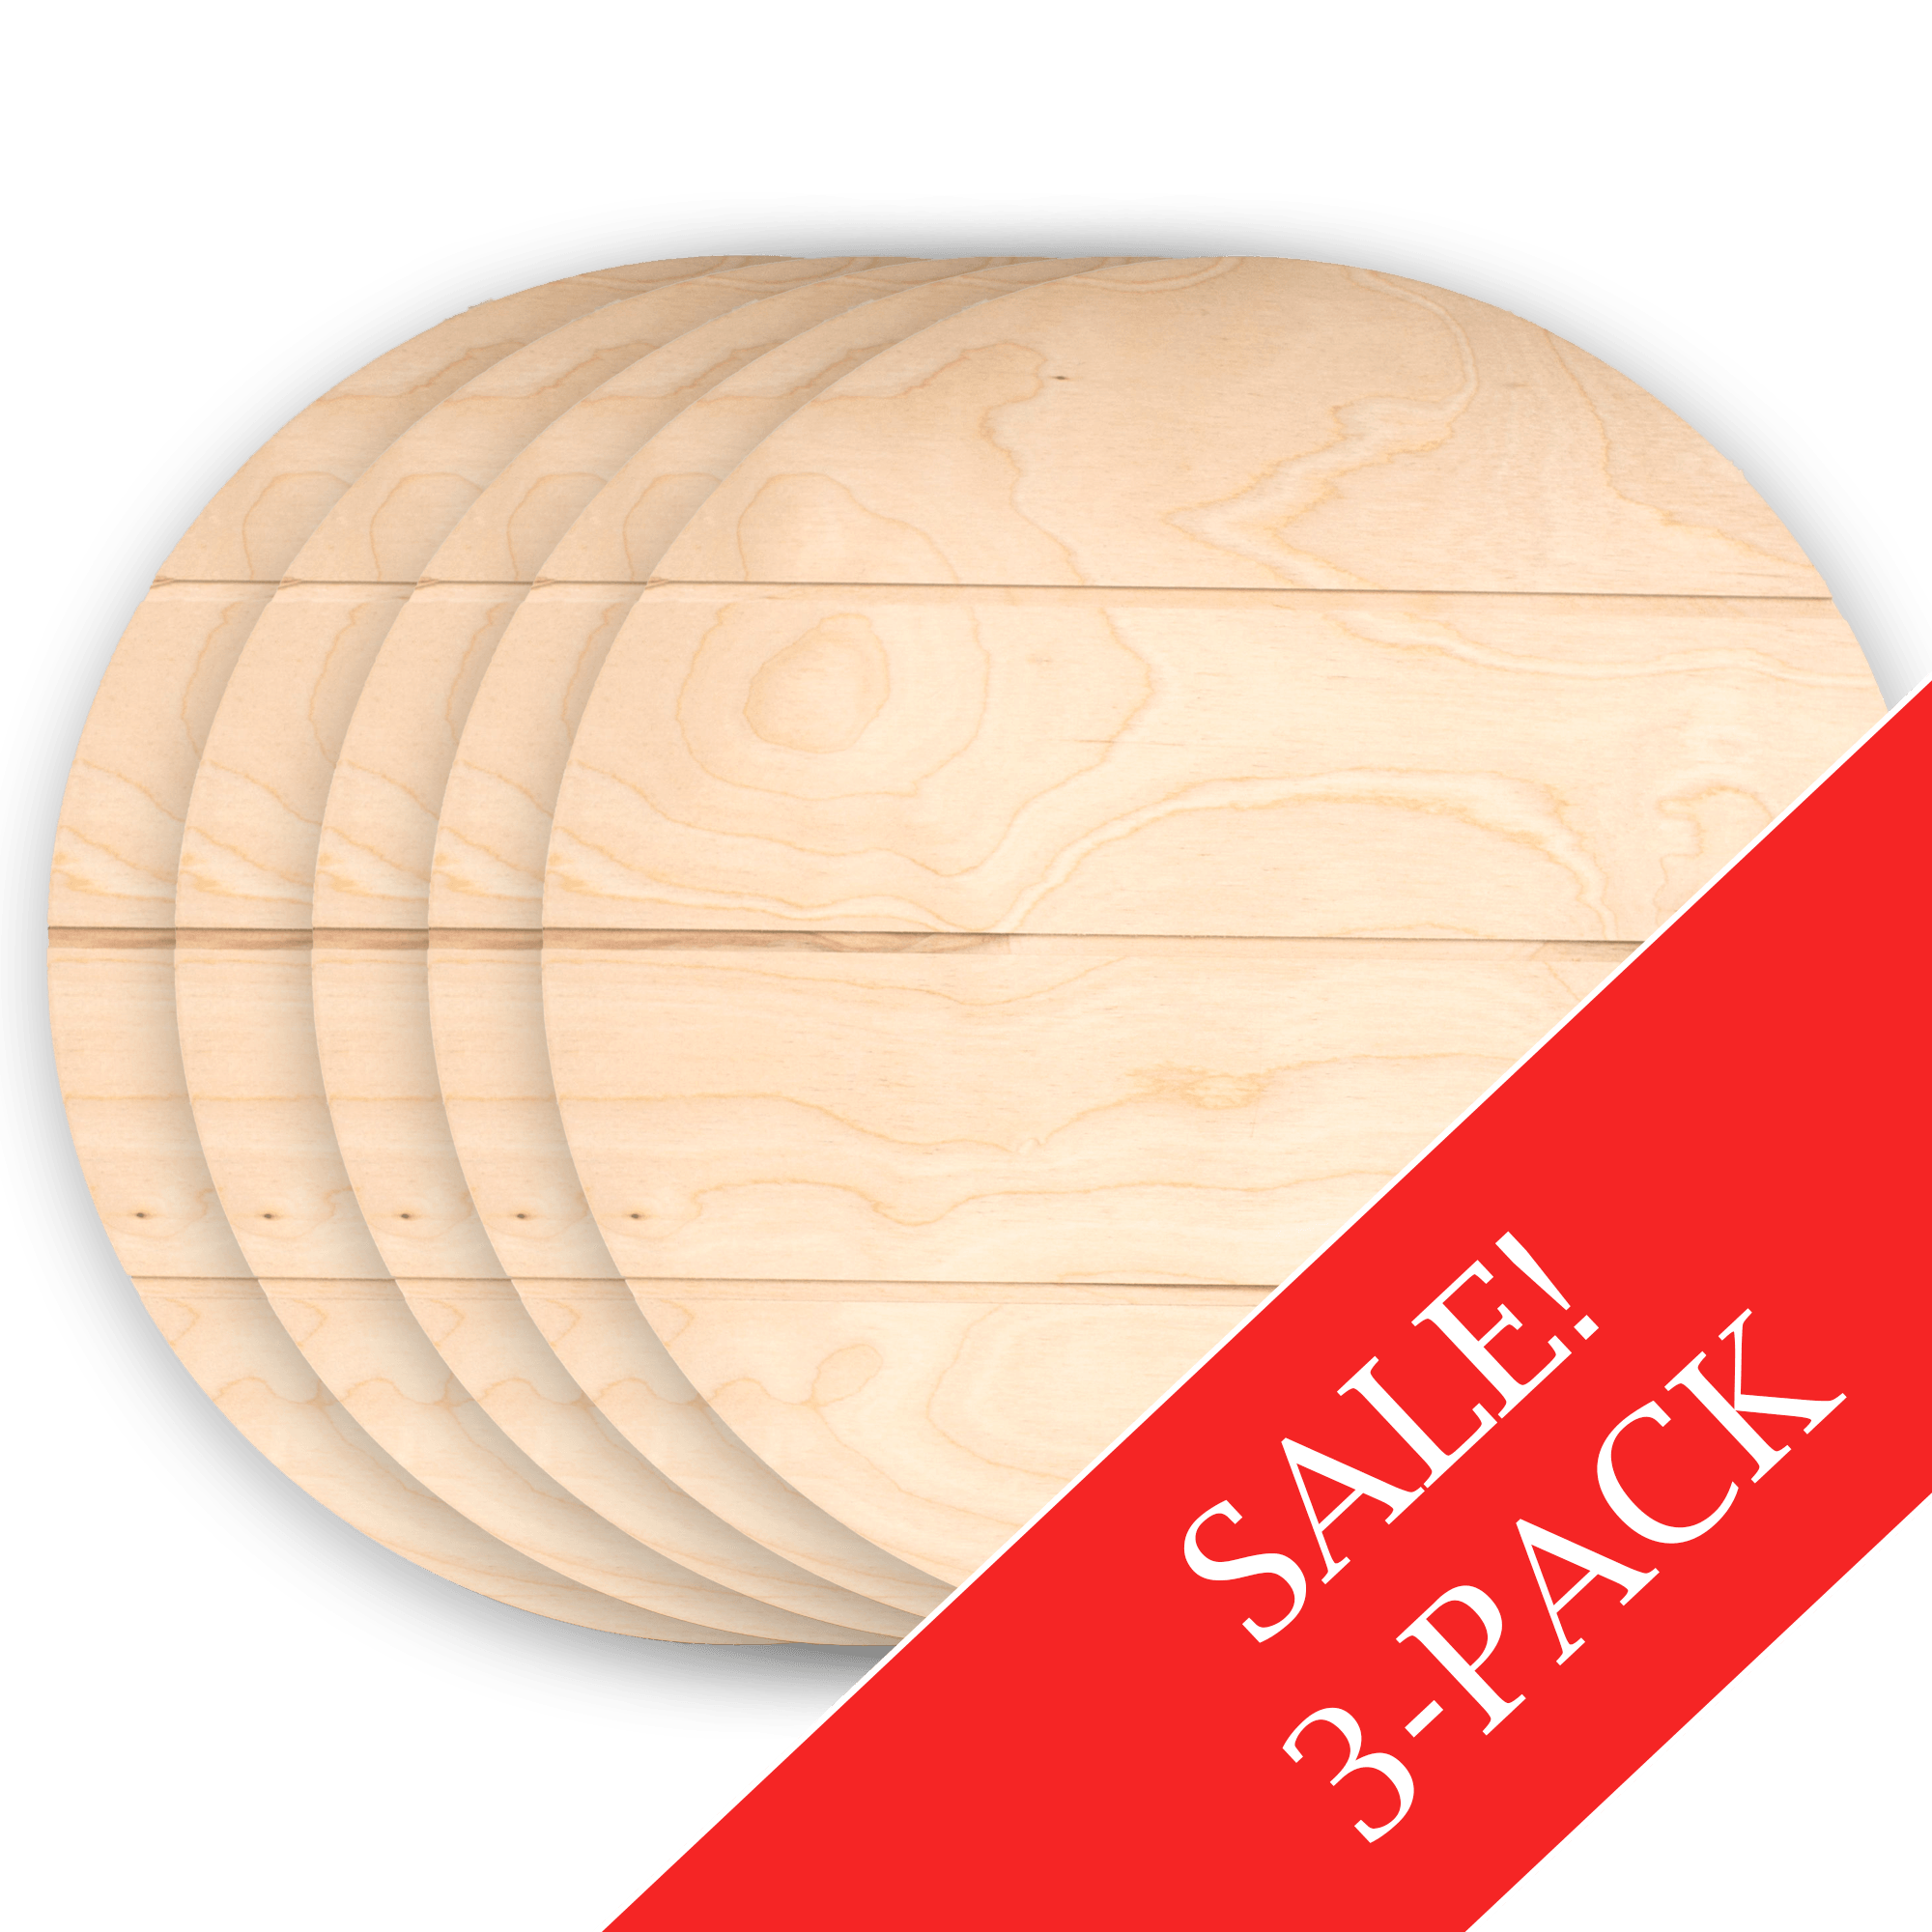 5-PACK & SAVE! - Shiplap Wood Round - Blank Supply